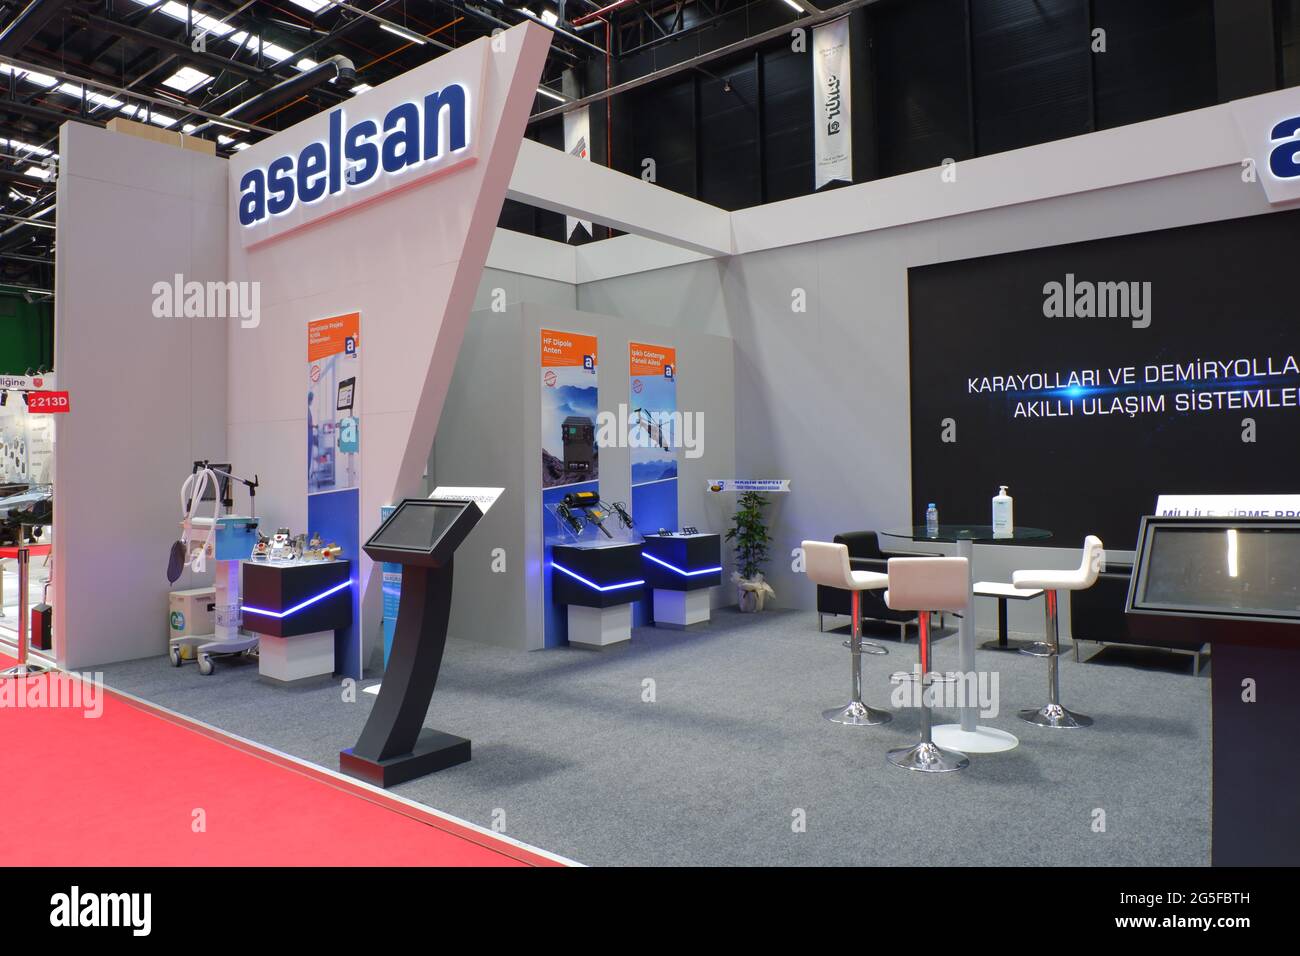 Aselsan Gallery at a Technology Fair Indoor Stock Photo